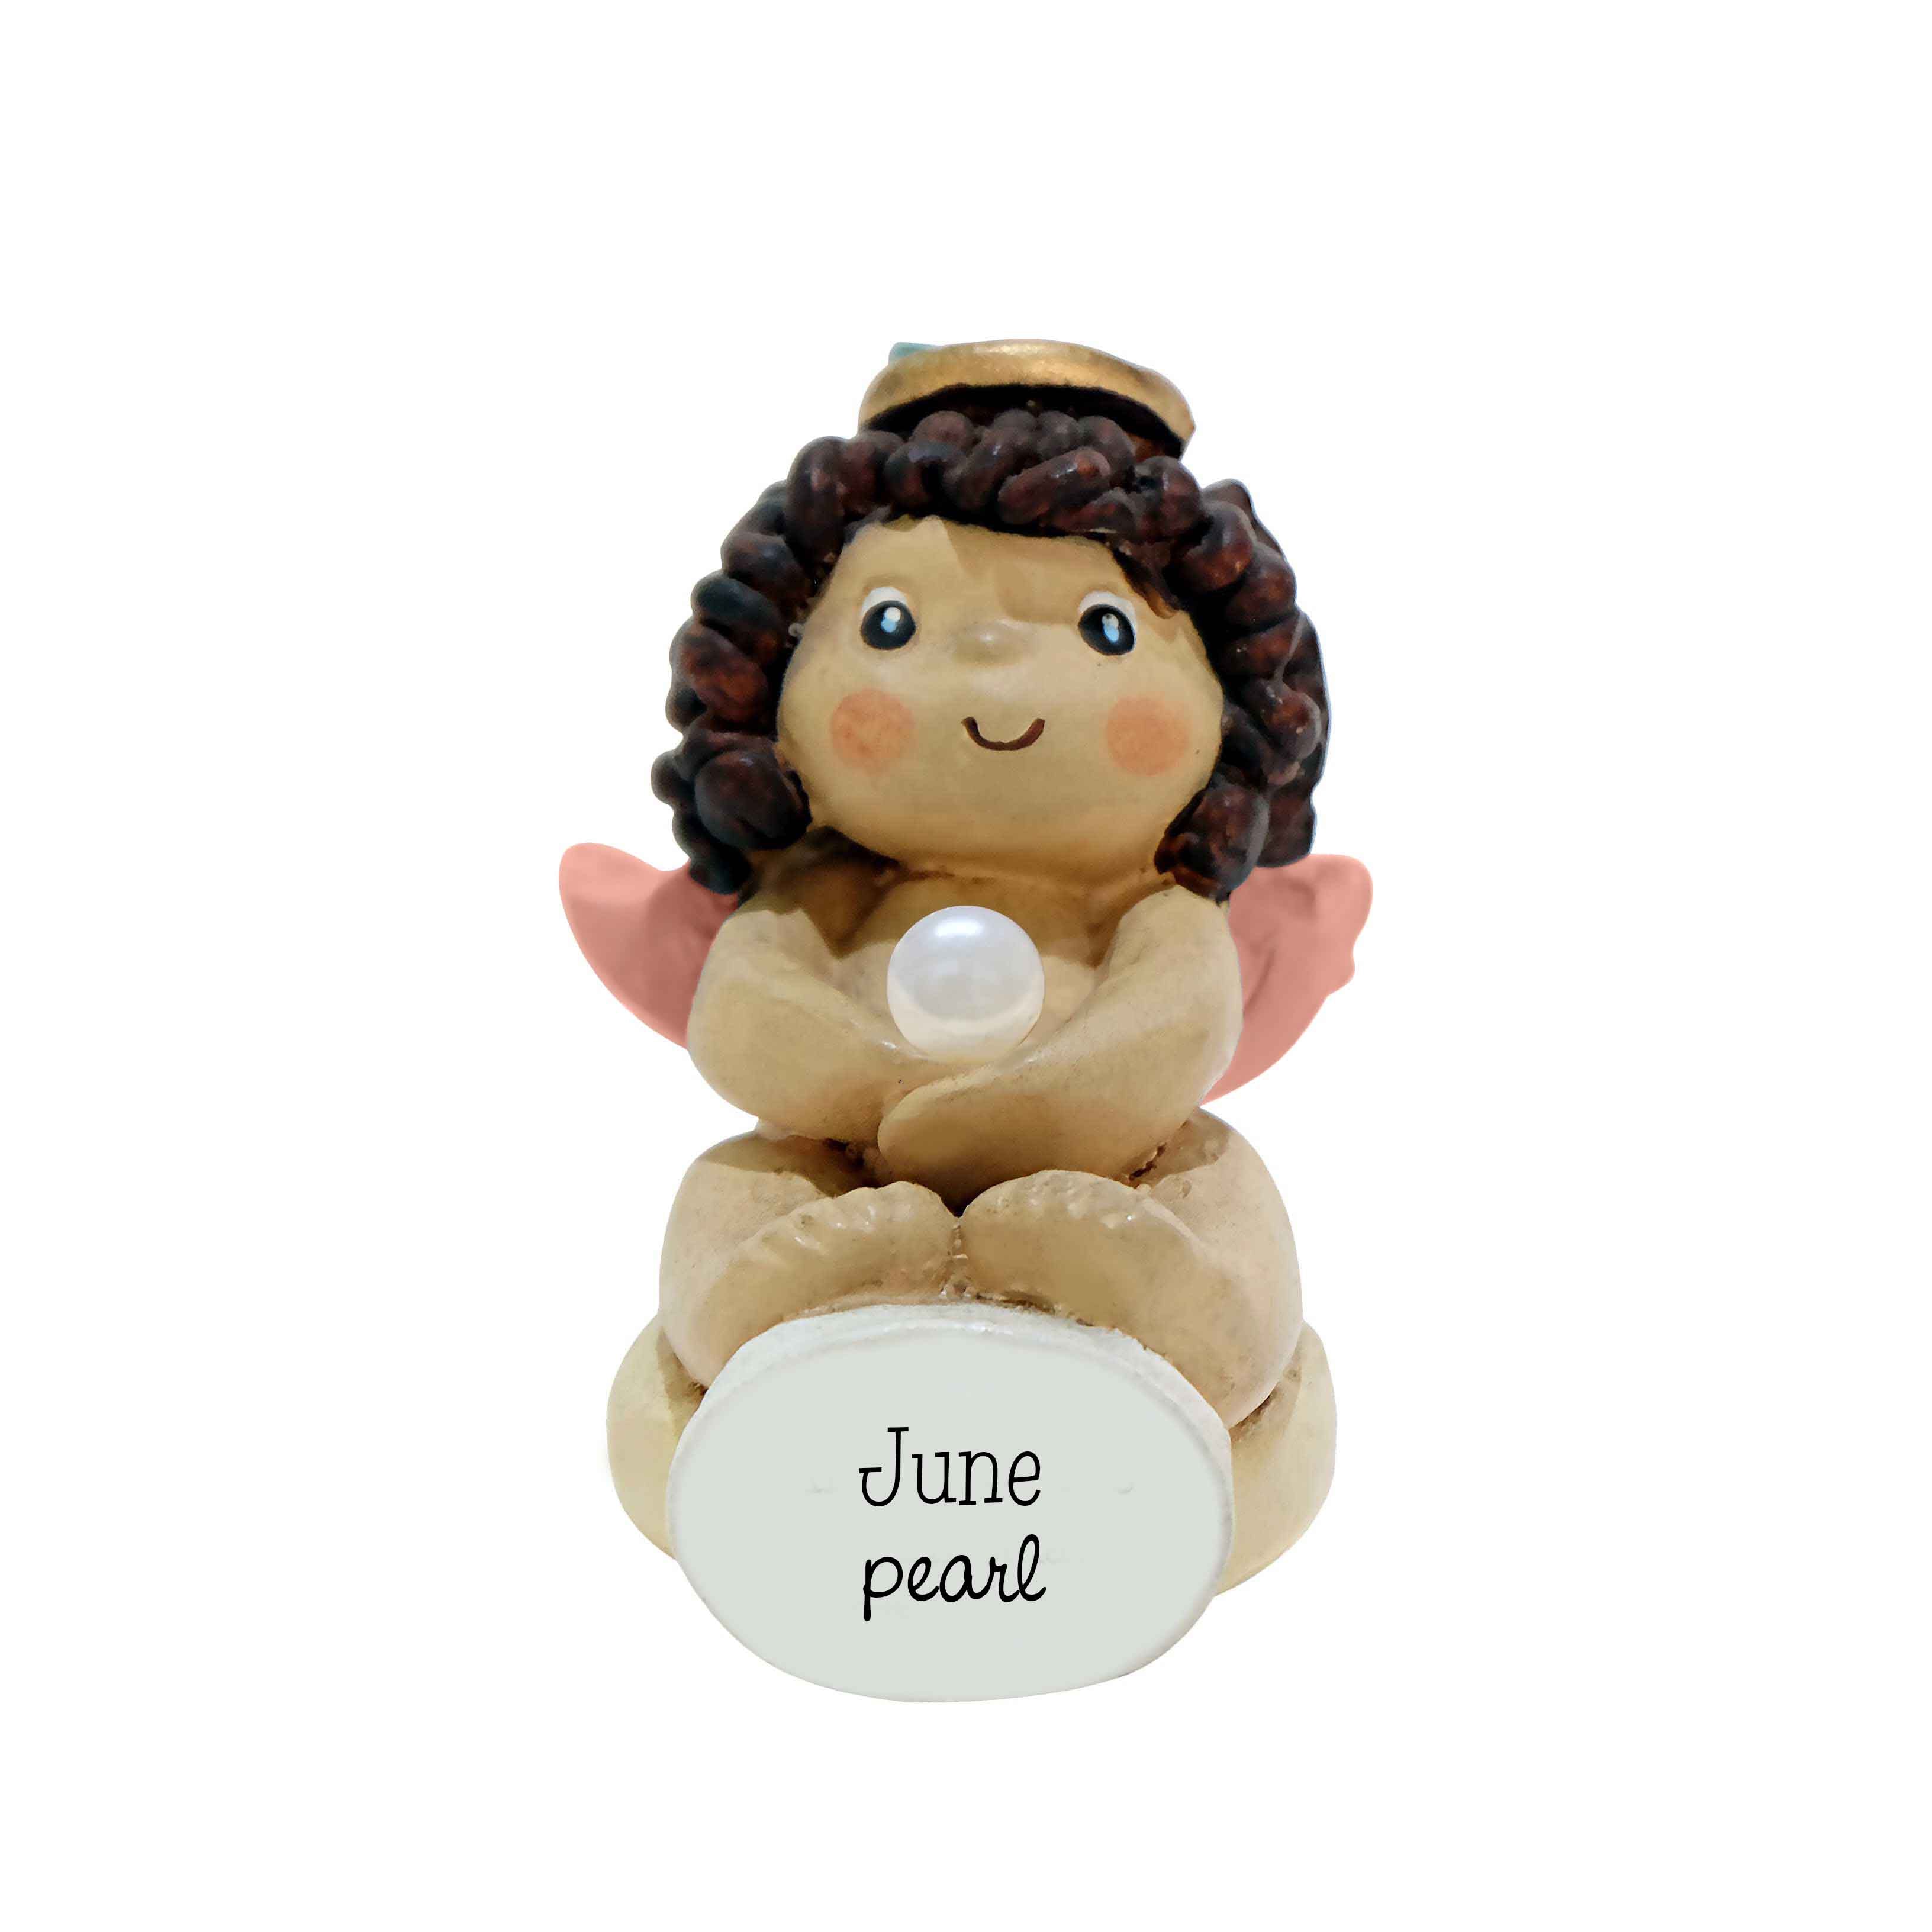 Personalized Angel Touch Birthstone Figurine With Gift Box